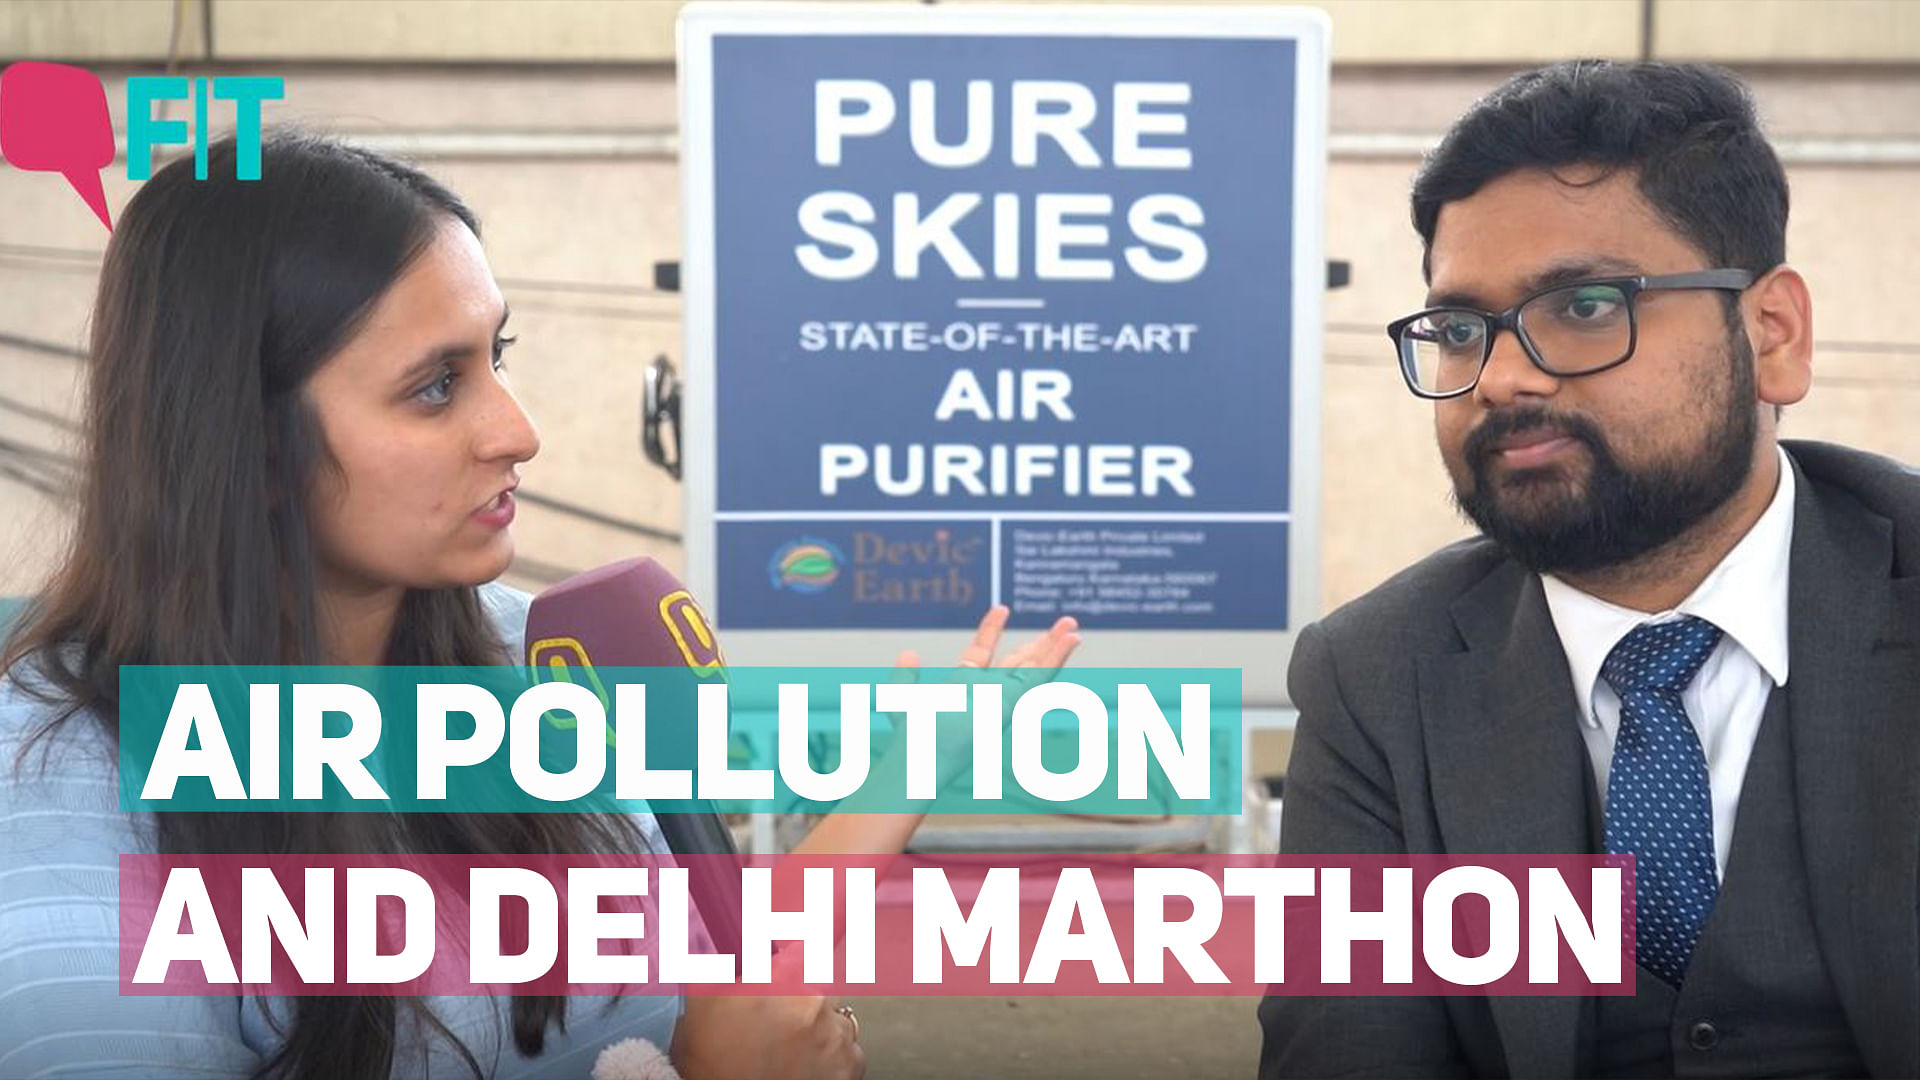 Running a marathon is exciting but in Delhi you wonder - is it safe? How can we save ourselves from air pollution?